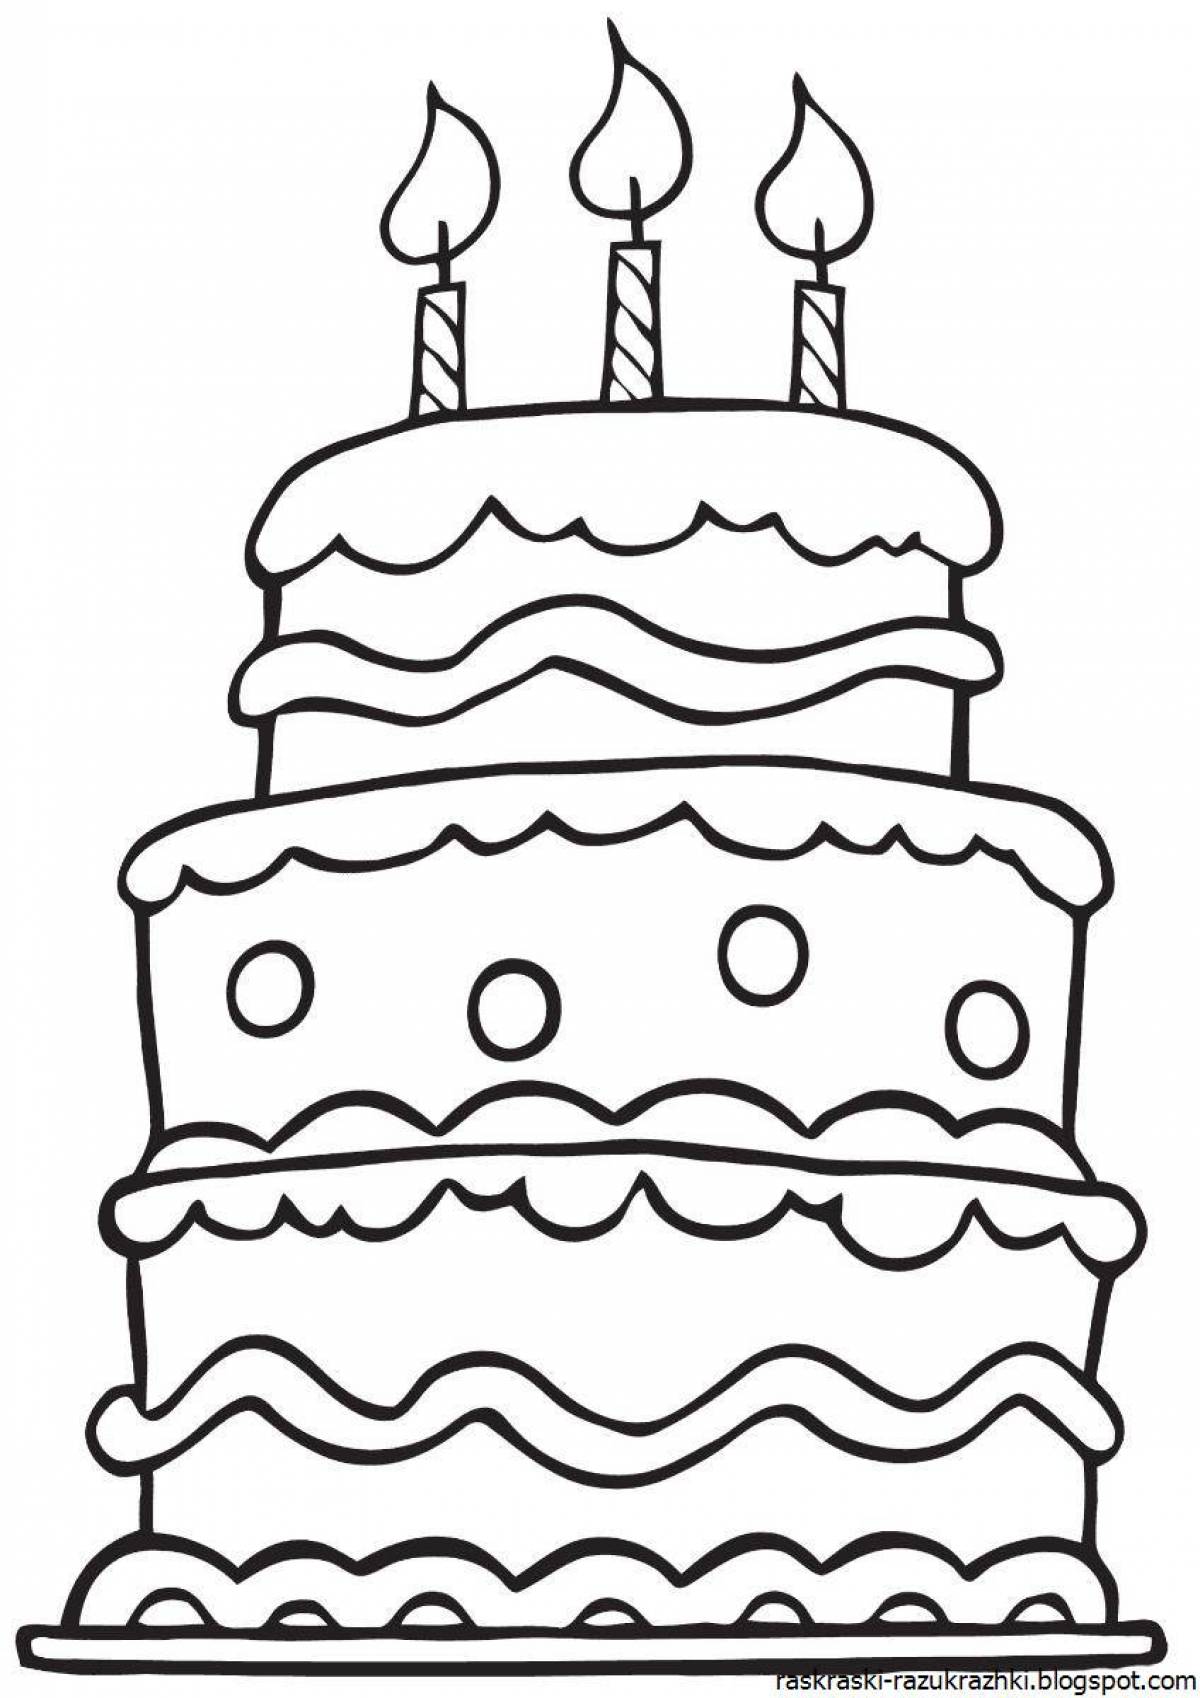 Colorful cake coloring book for kids